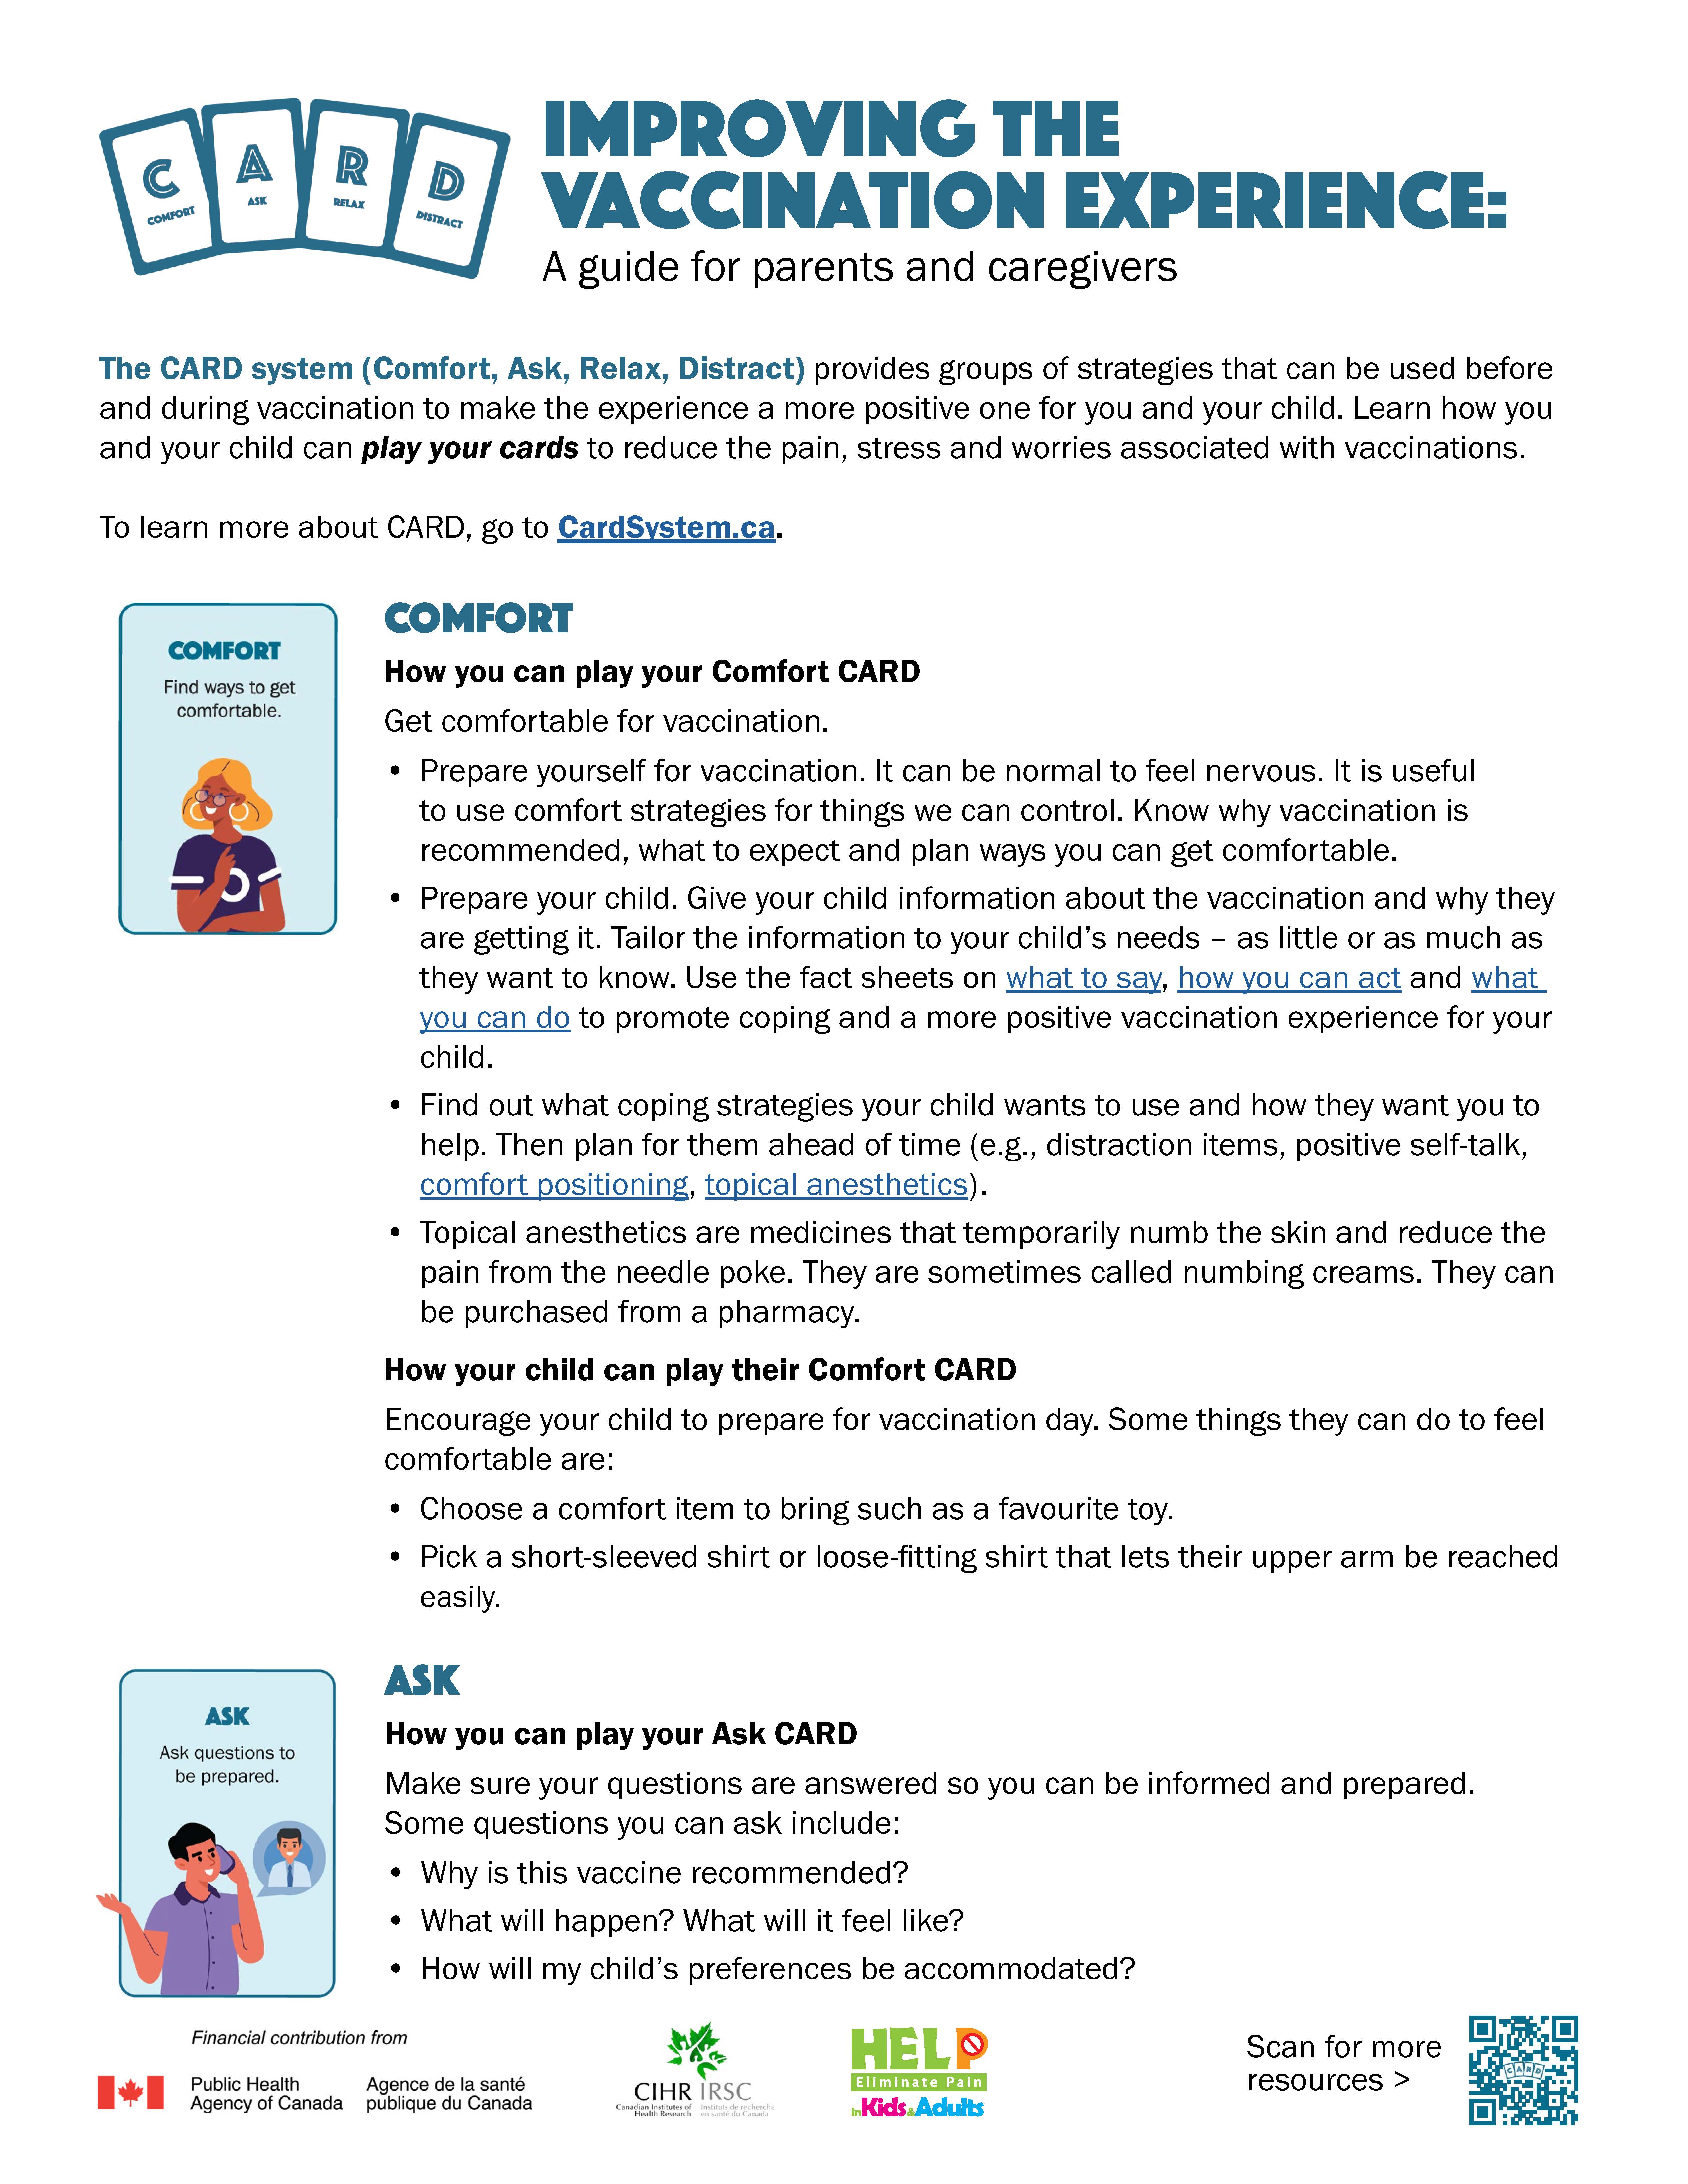 Improving the vaccination experience: A guide for parents and caregivers